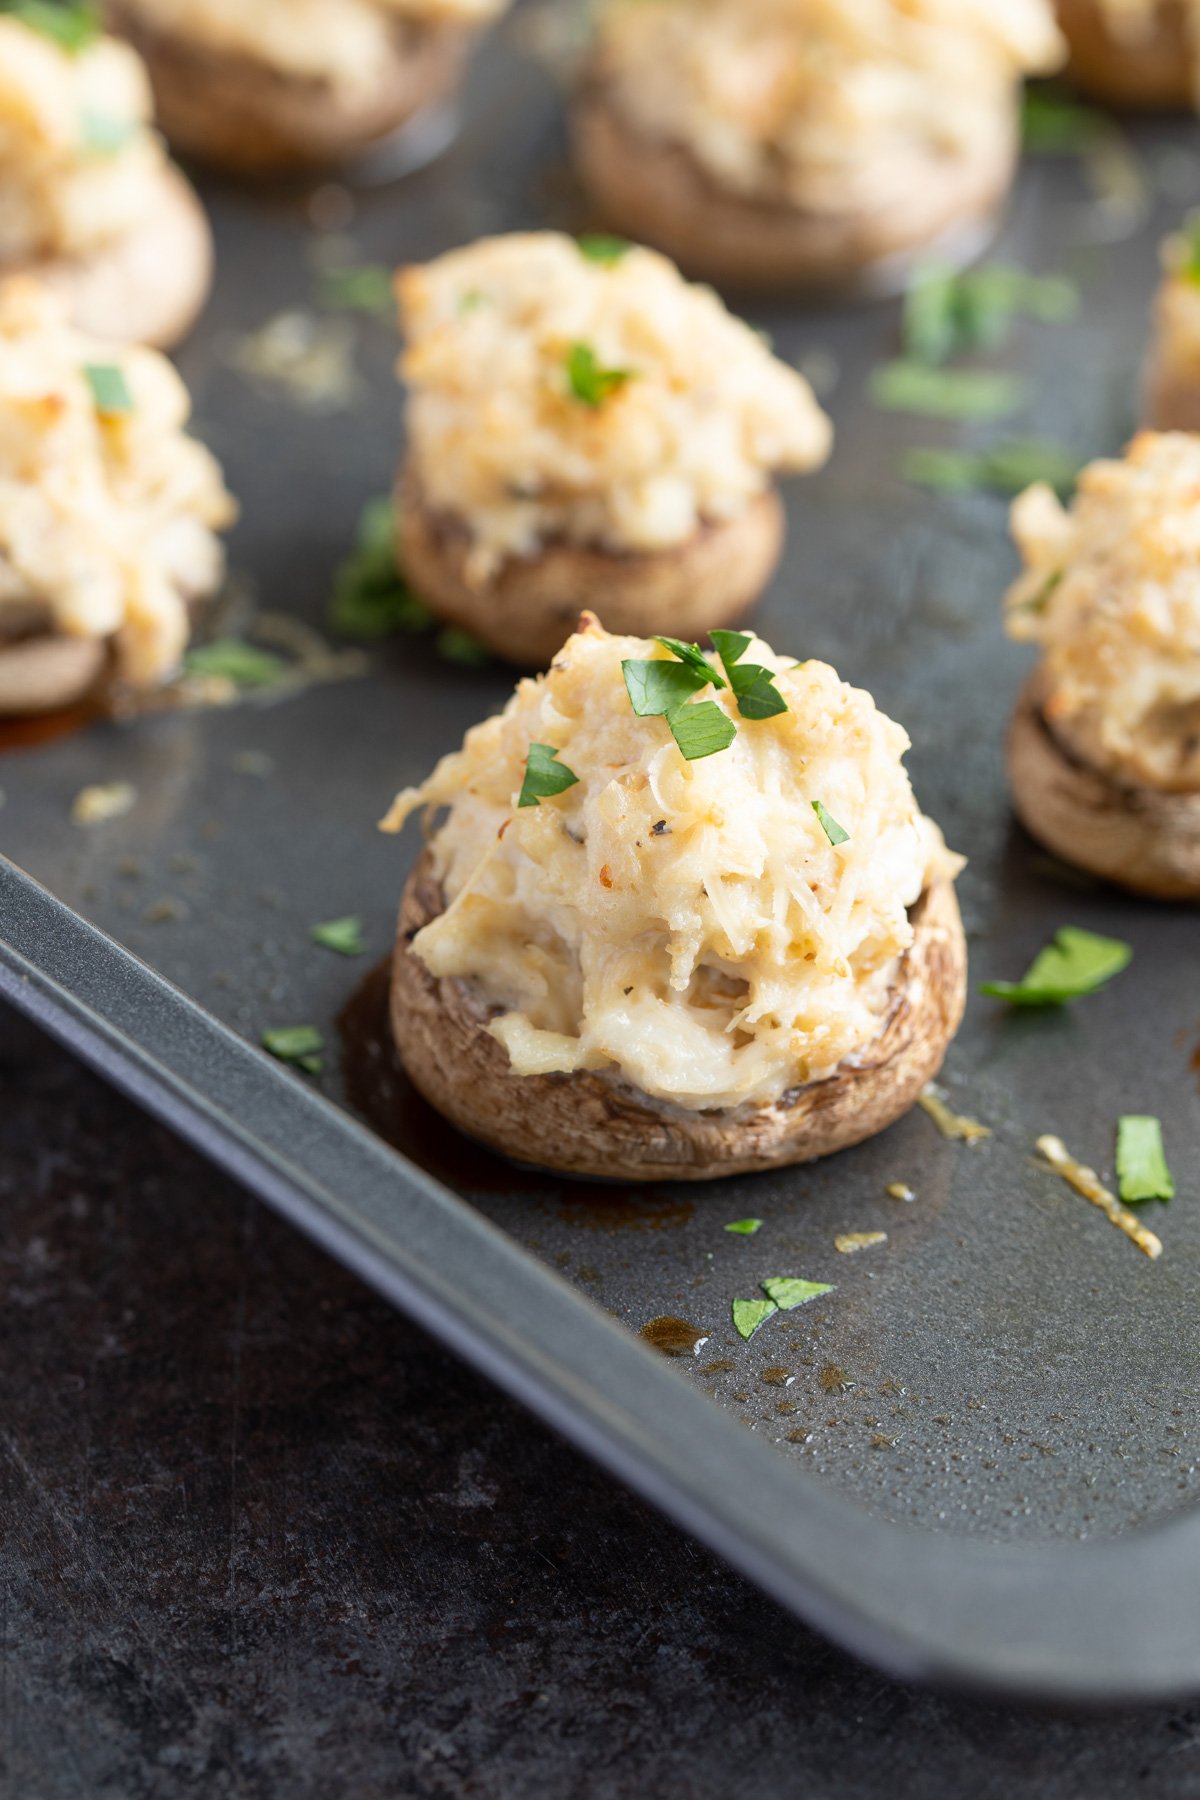 Closeup view of a stuffed mushroom sprinkled with chopped parsley on a baking sheet.